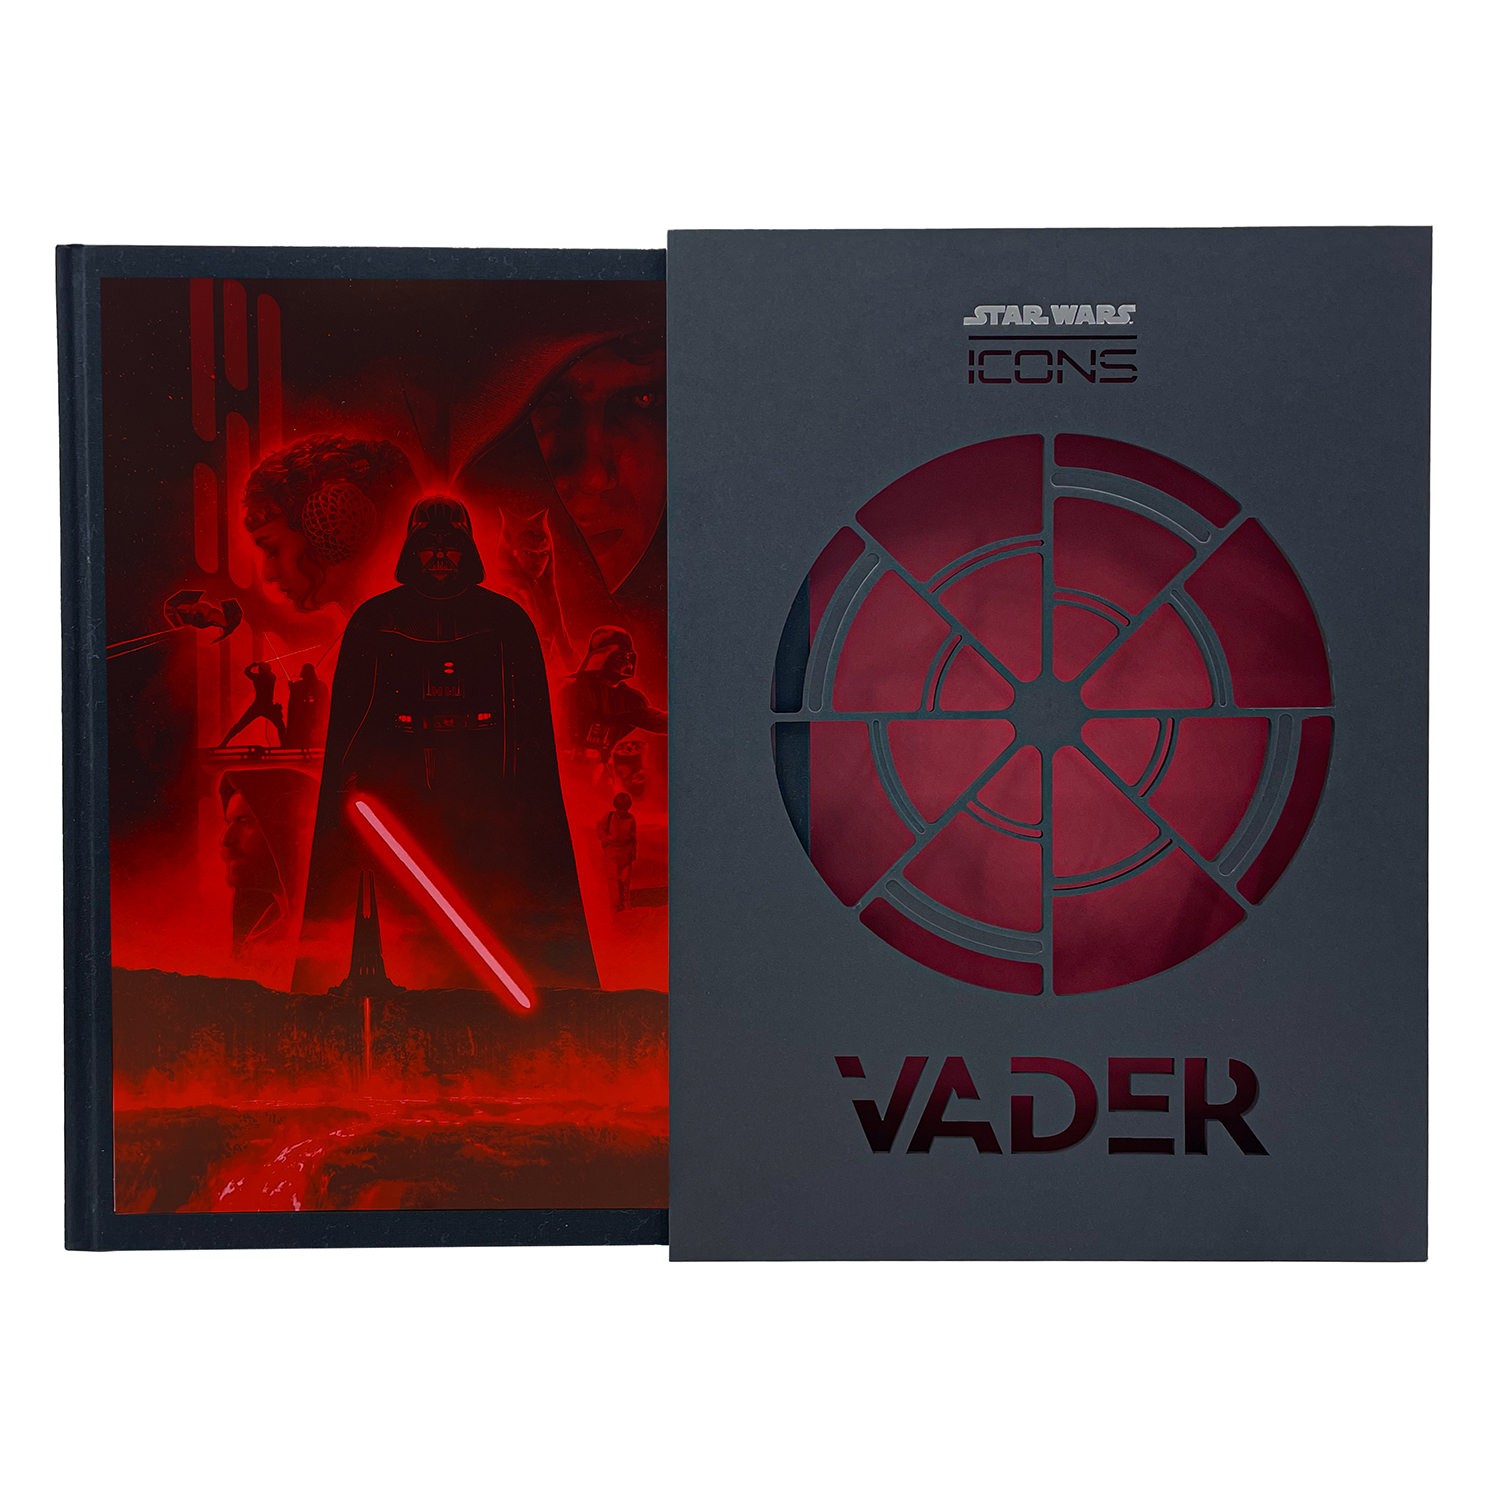 Star Wars Icons: Darth Vader (Prototype Shown) View 4